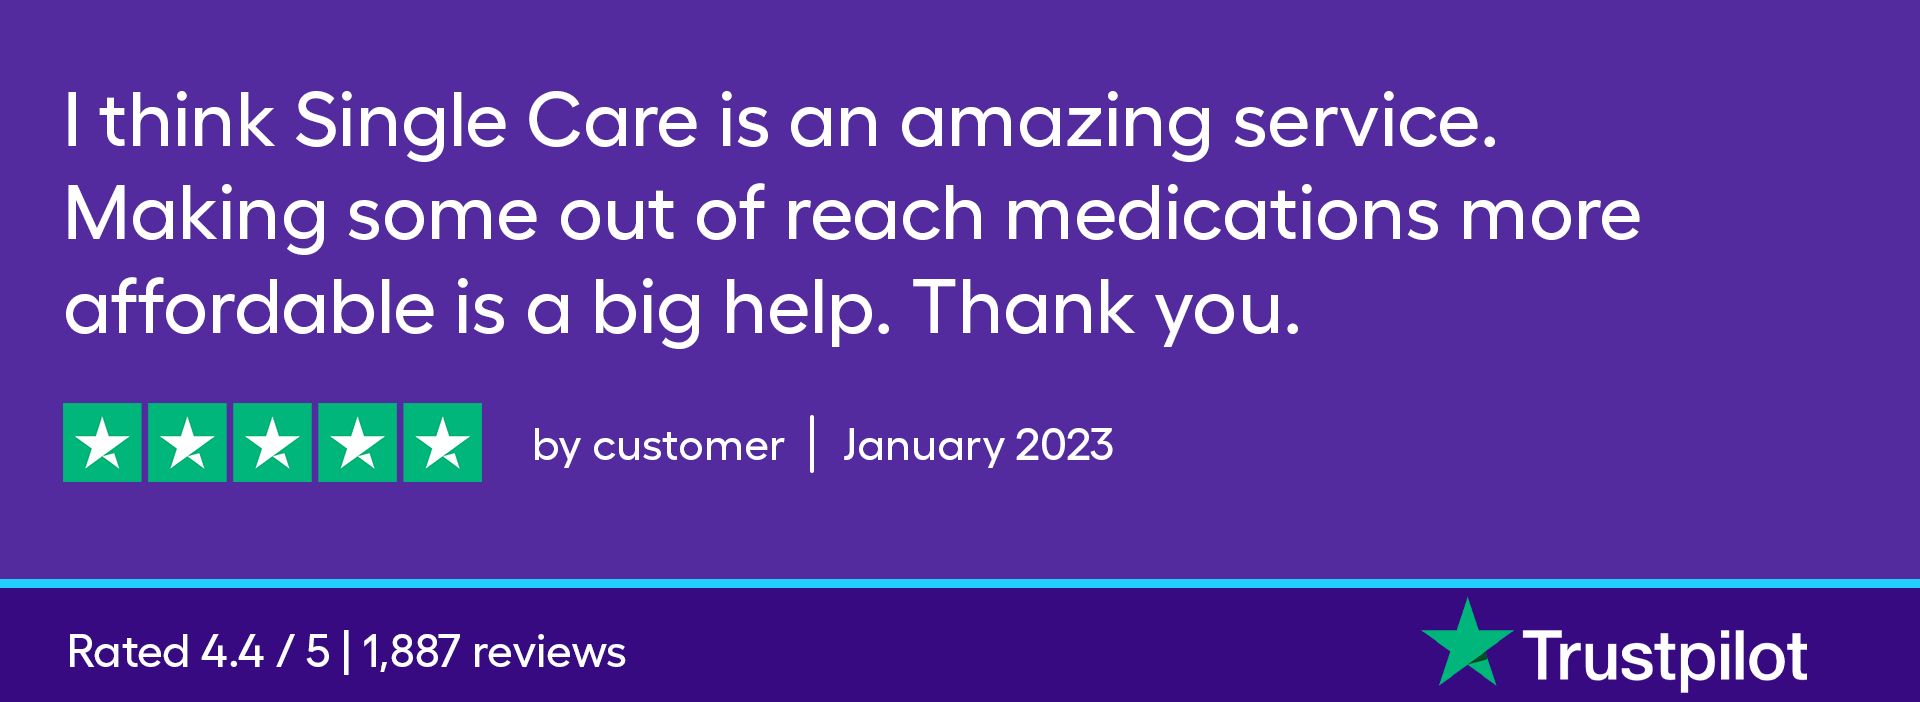 I think SingleCare is an amazing service. Making some out of reach medications more affordable is a big help. Thank you.